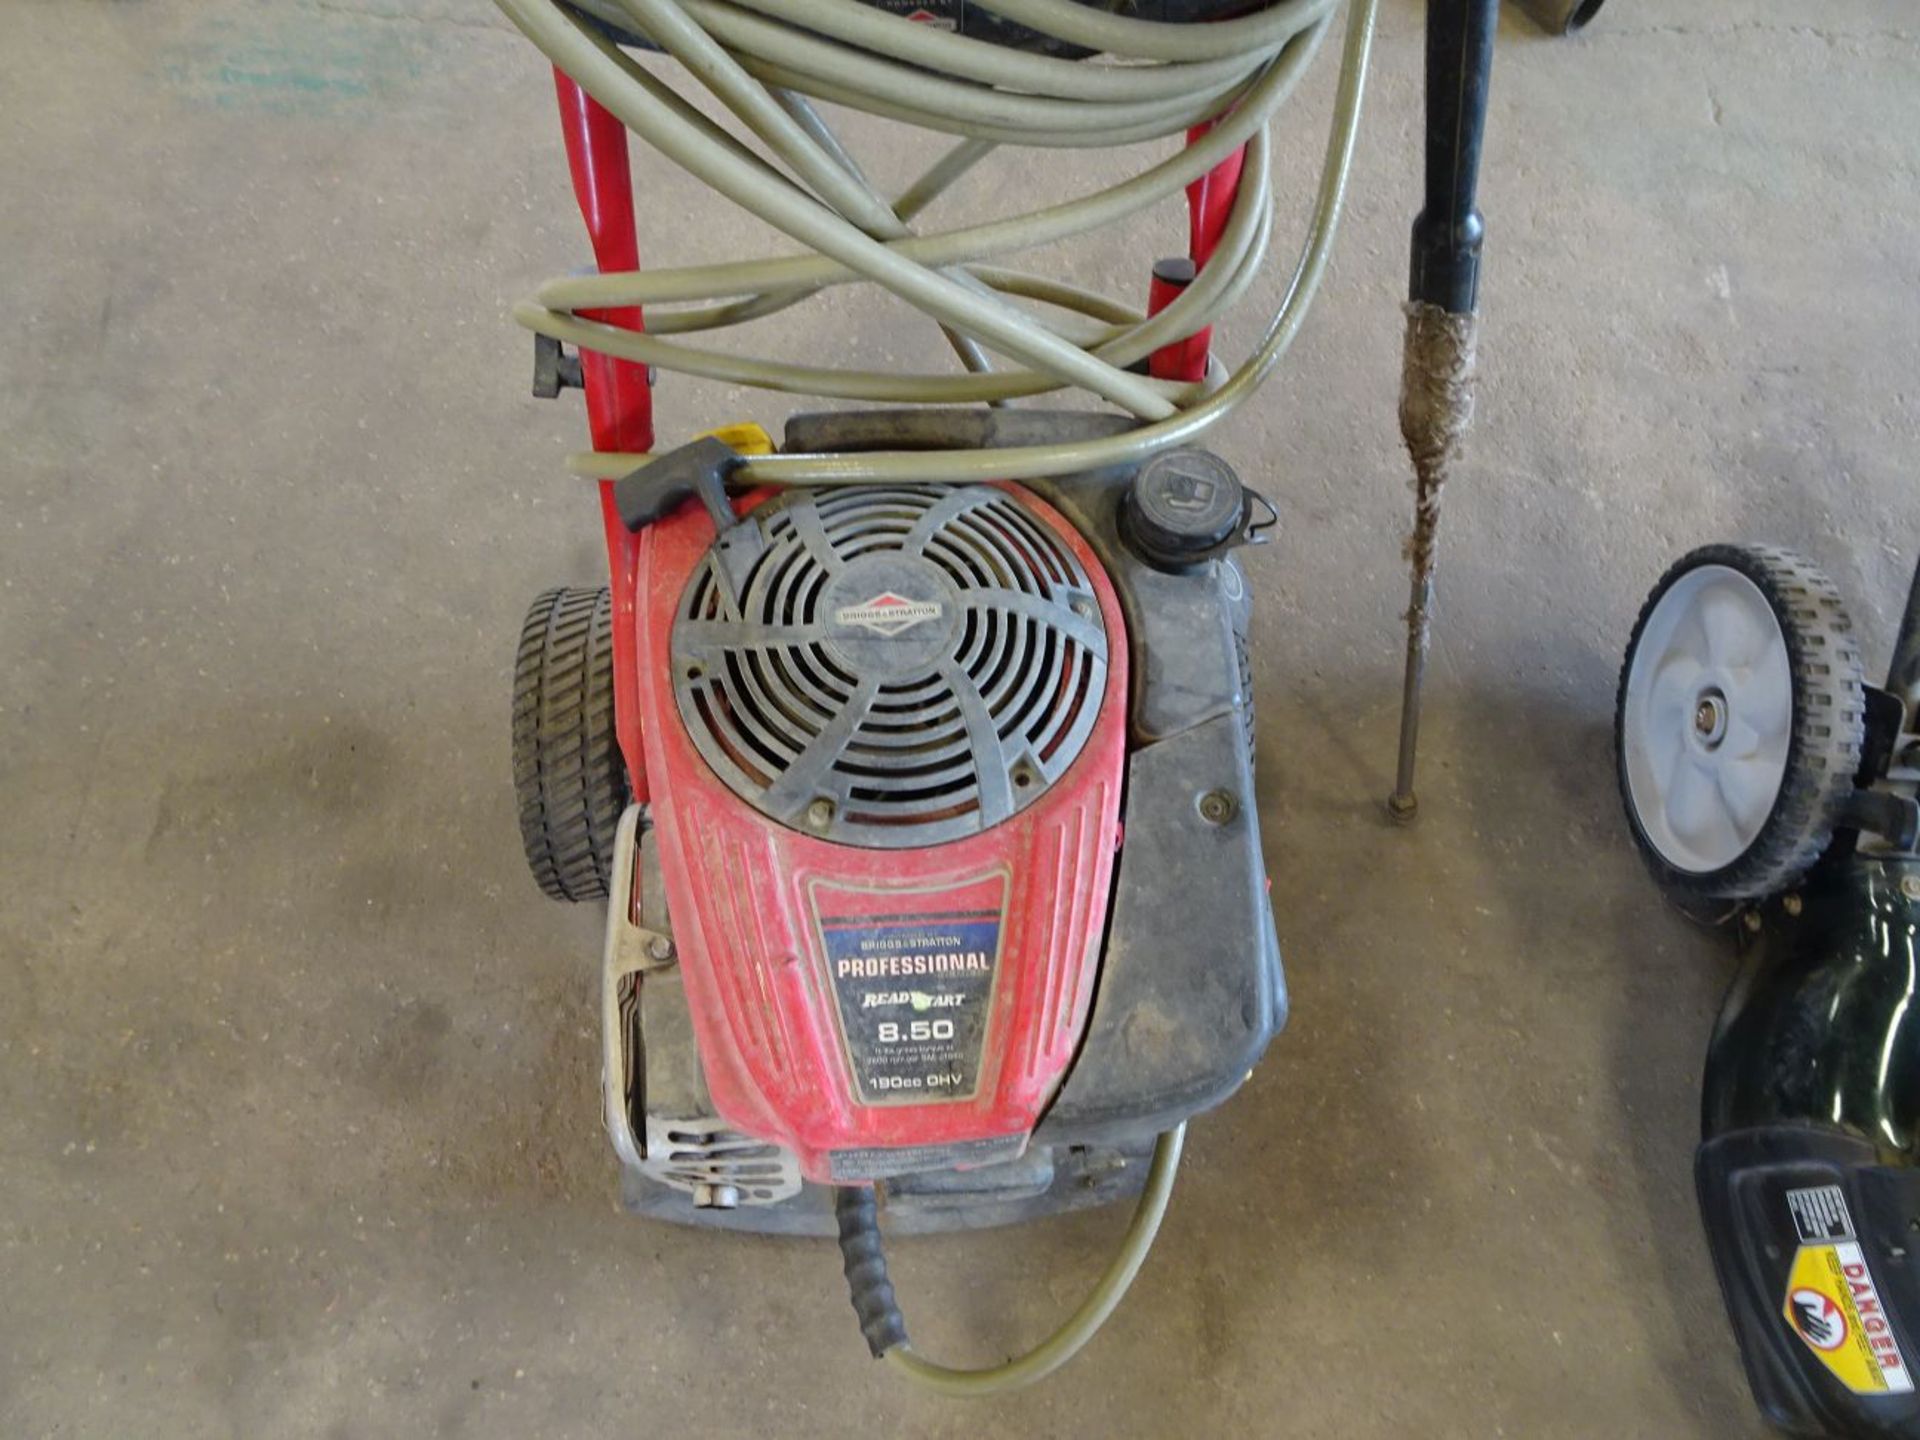 TROY BILT PRESSURE WASHER WITH HOSE AND WAND, 2800 MAX PSI (LOCATION: SHOP) - Image 2 of 4